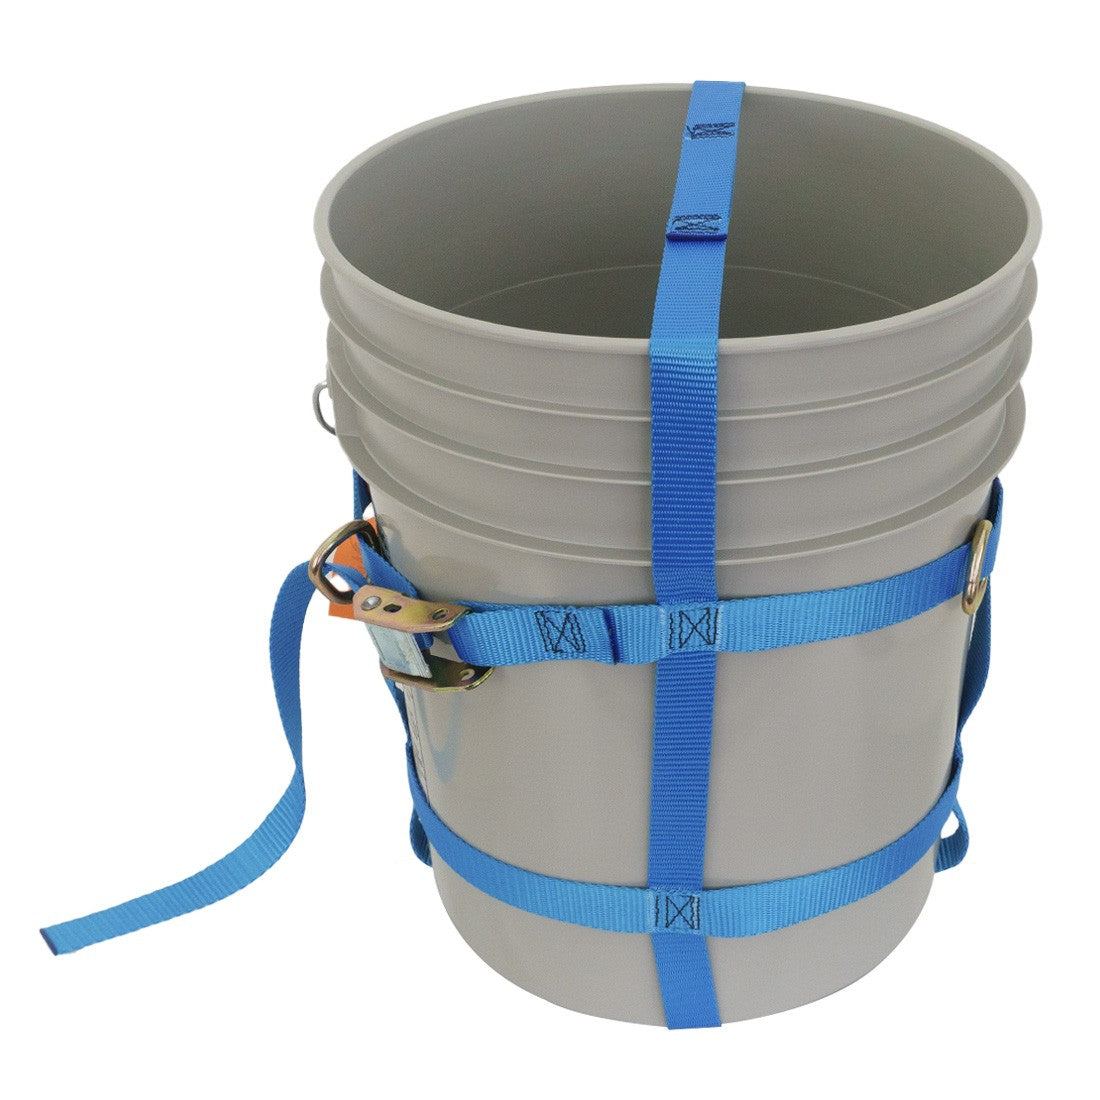 The Original Bucket Stool for 3.5 Gallon and 5 Macao